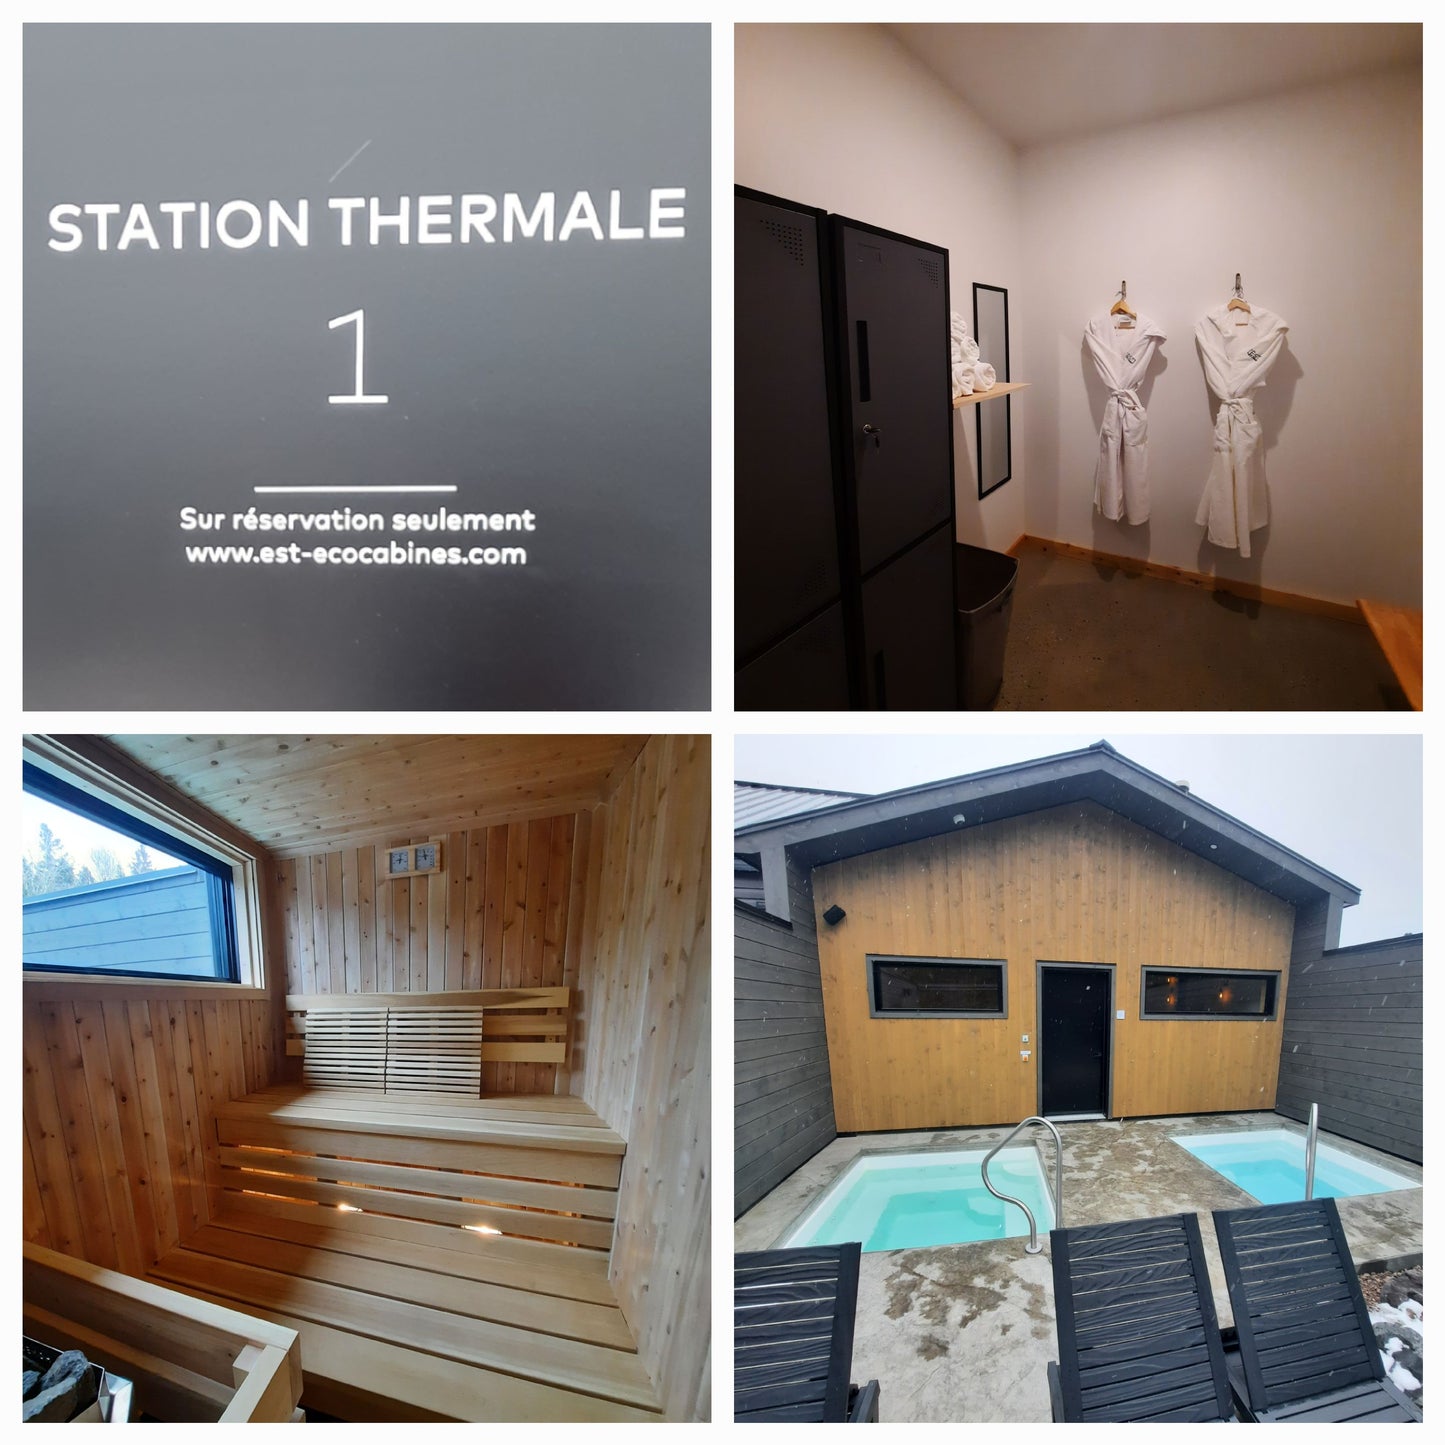 Station Thermale 1